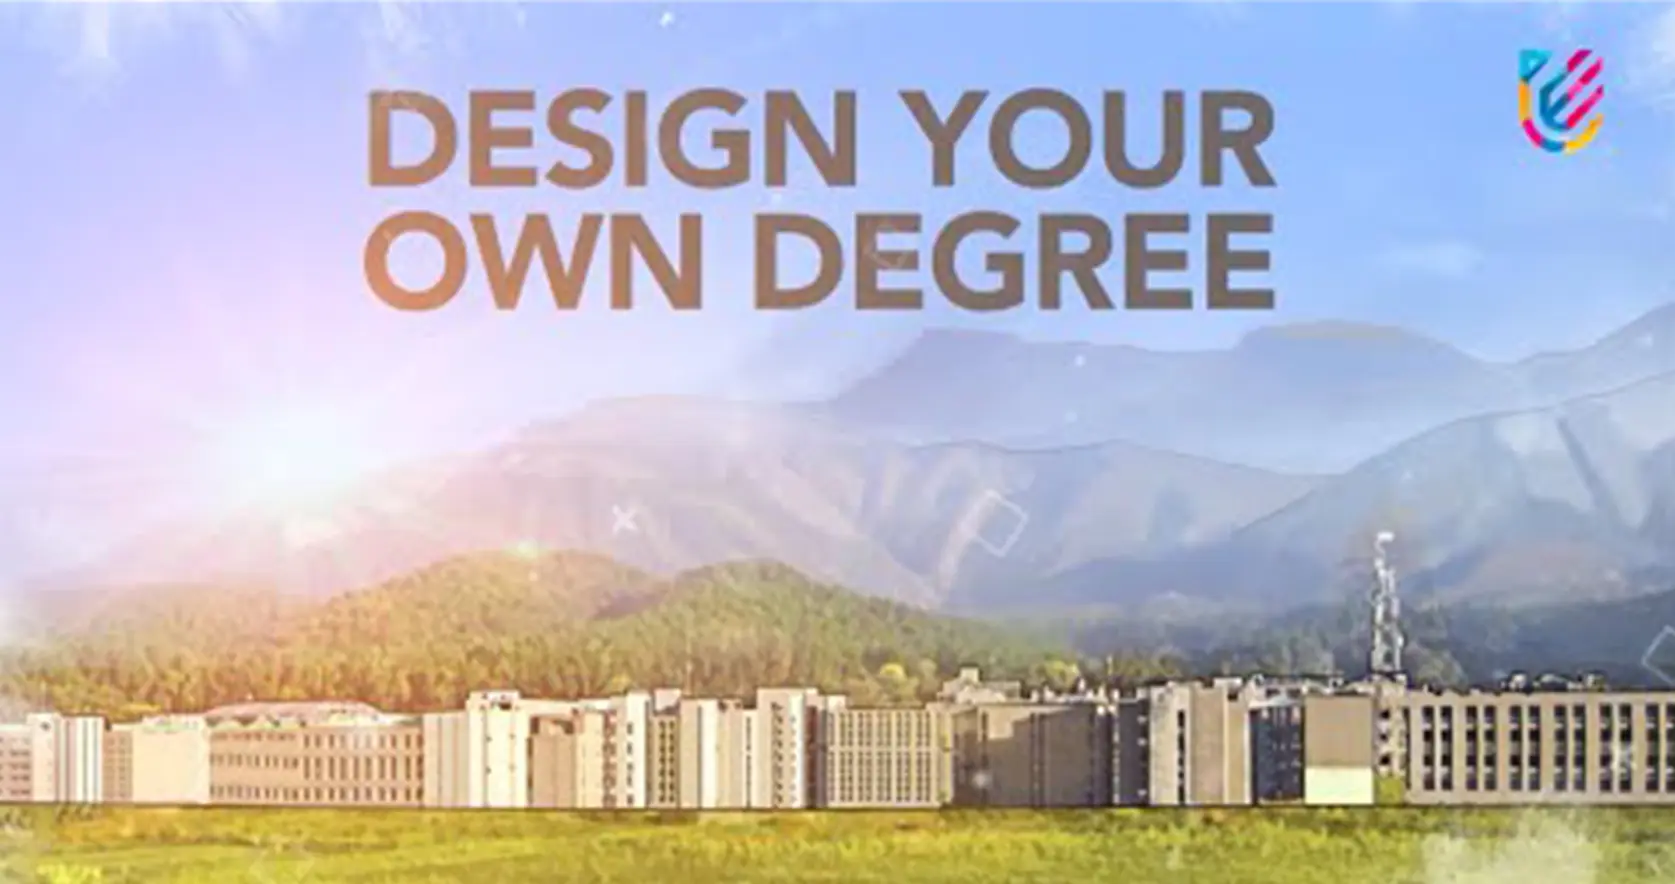 Design your own degree